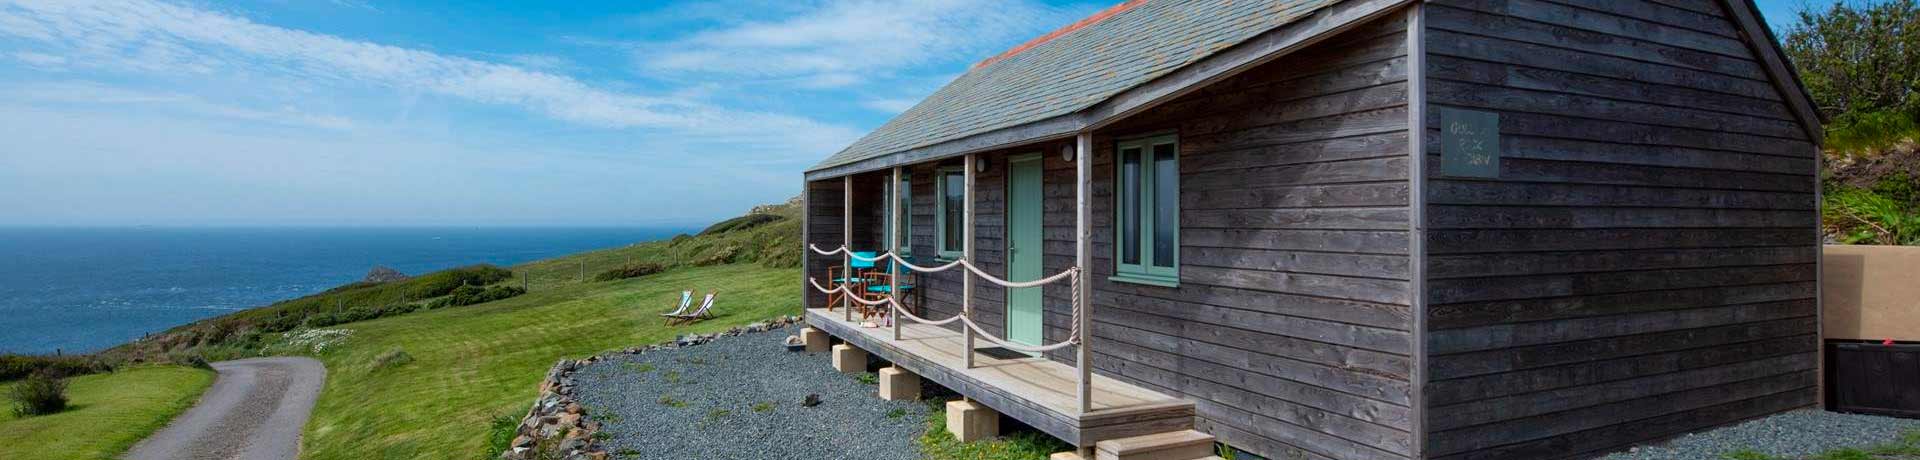 Best holiday cottages with sea views in Cornwall